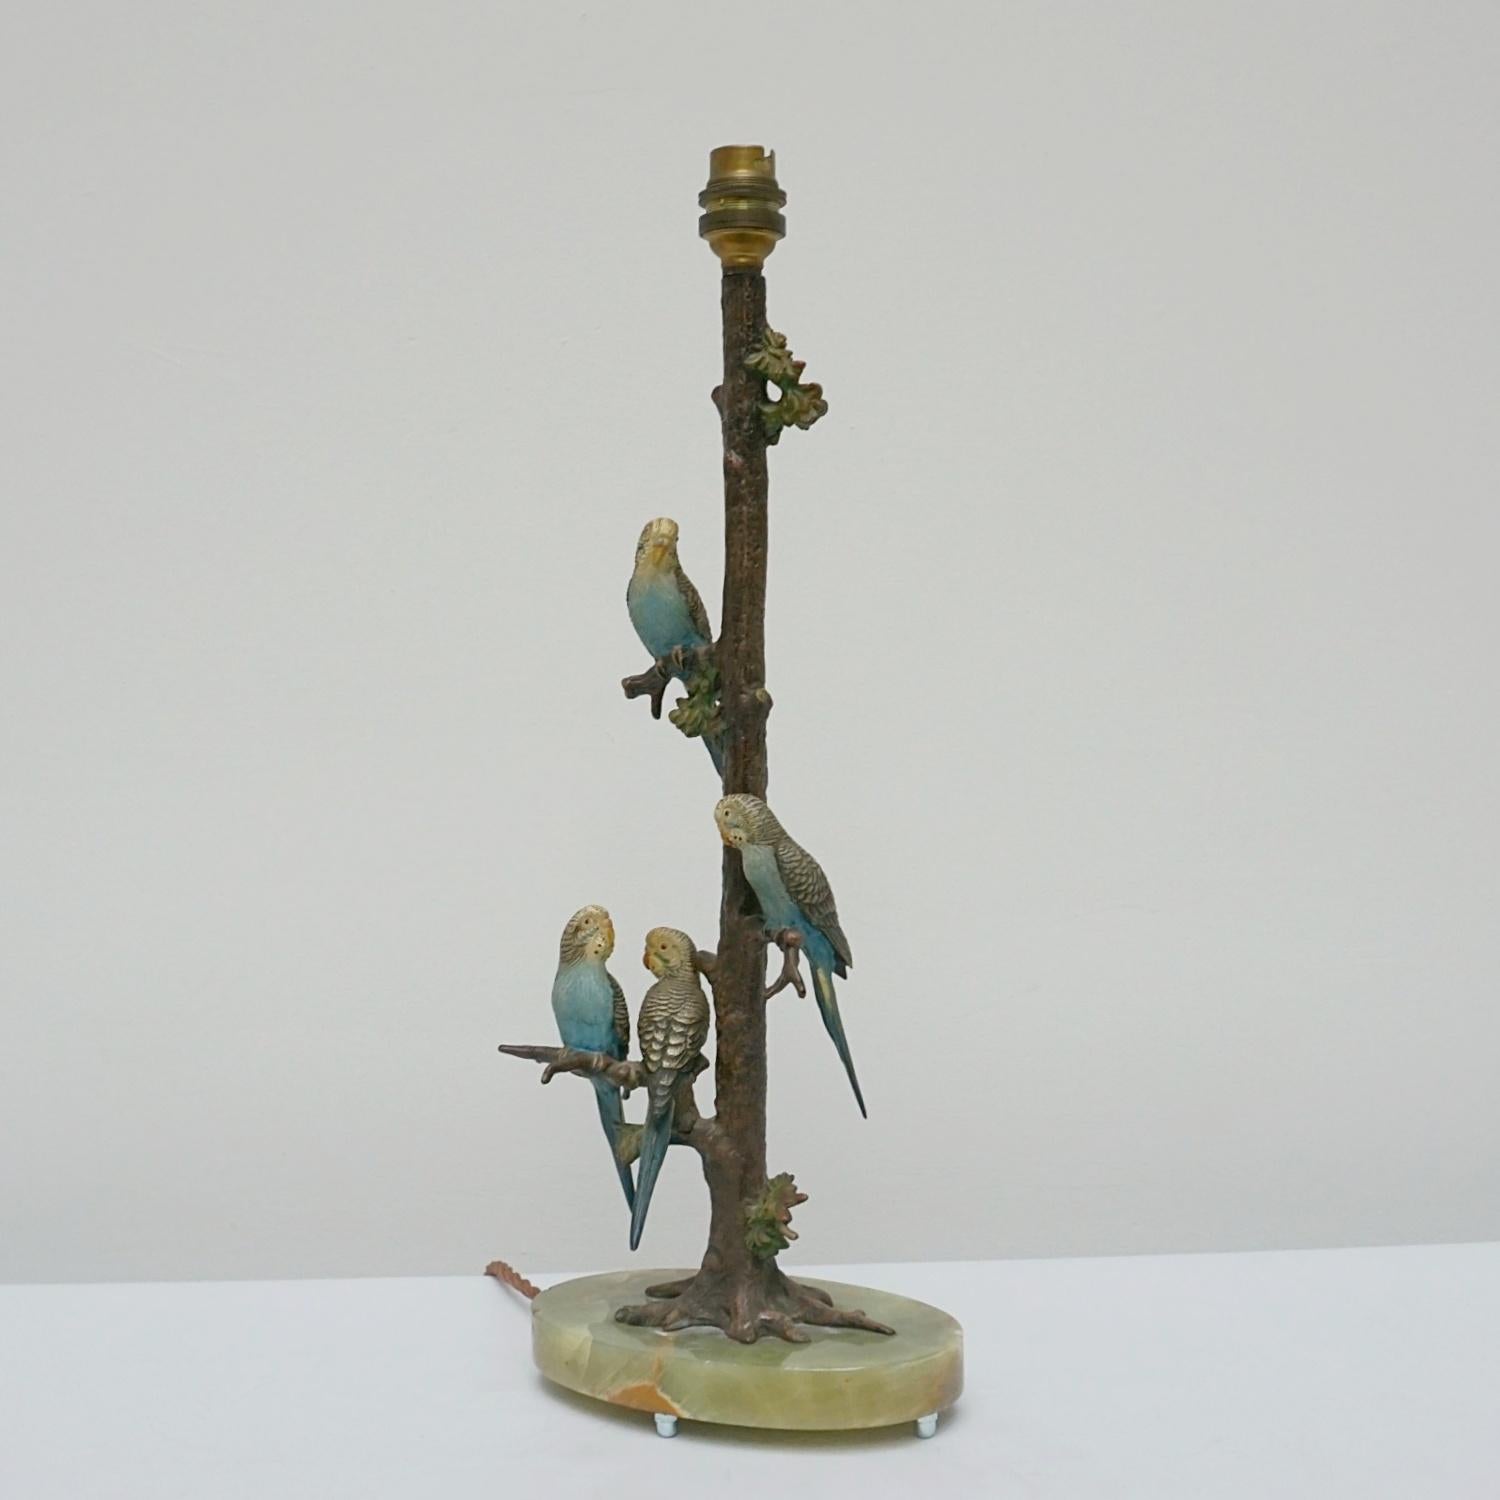 An Art Deco cold painted bronze budgerigar table lamp. Four sculpted bronze birds perching on leafy branches, set over an oval onyx base. 

Dimensions: H 45.5cm W 17.5cm D 11cm

Origin: Austria

Date: Circa, 1920

Item Number: